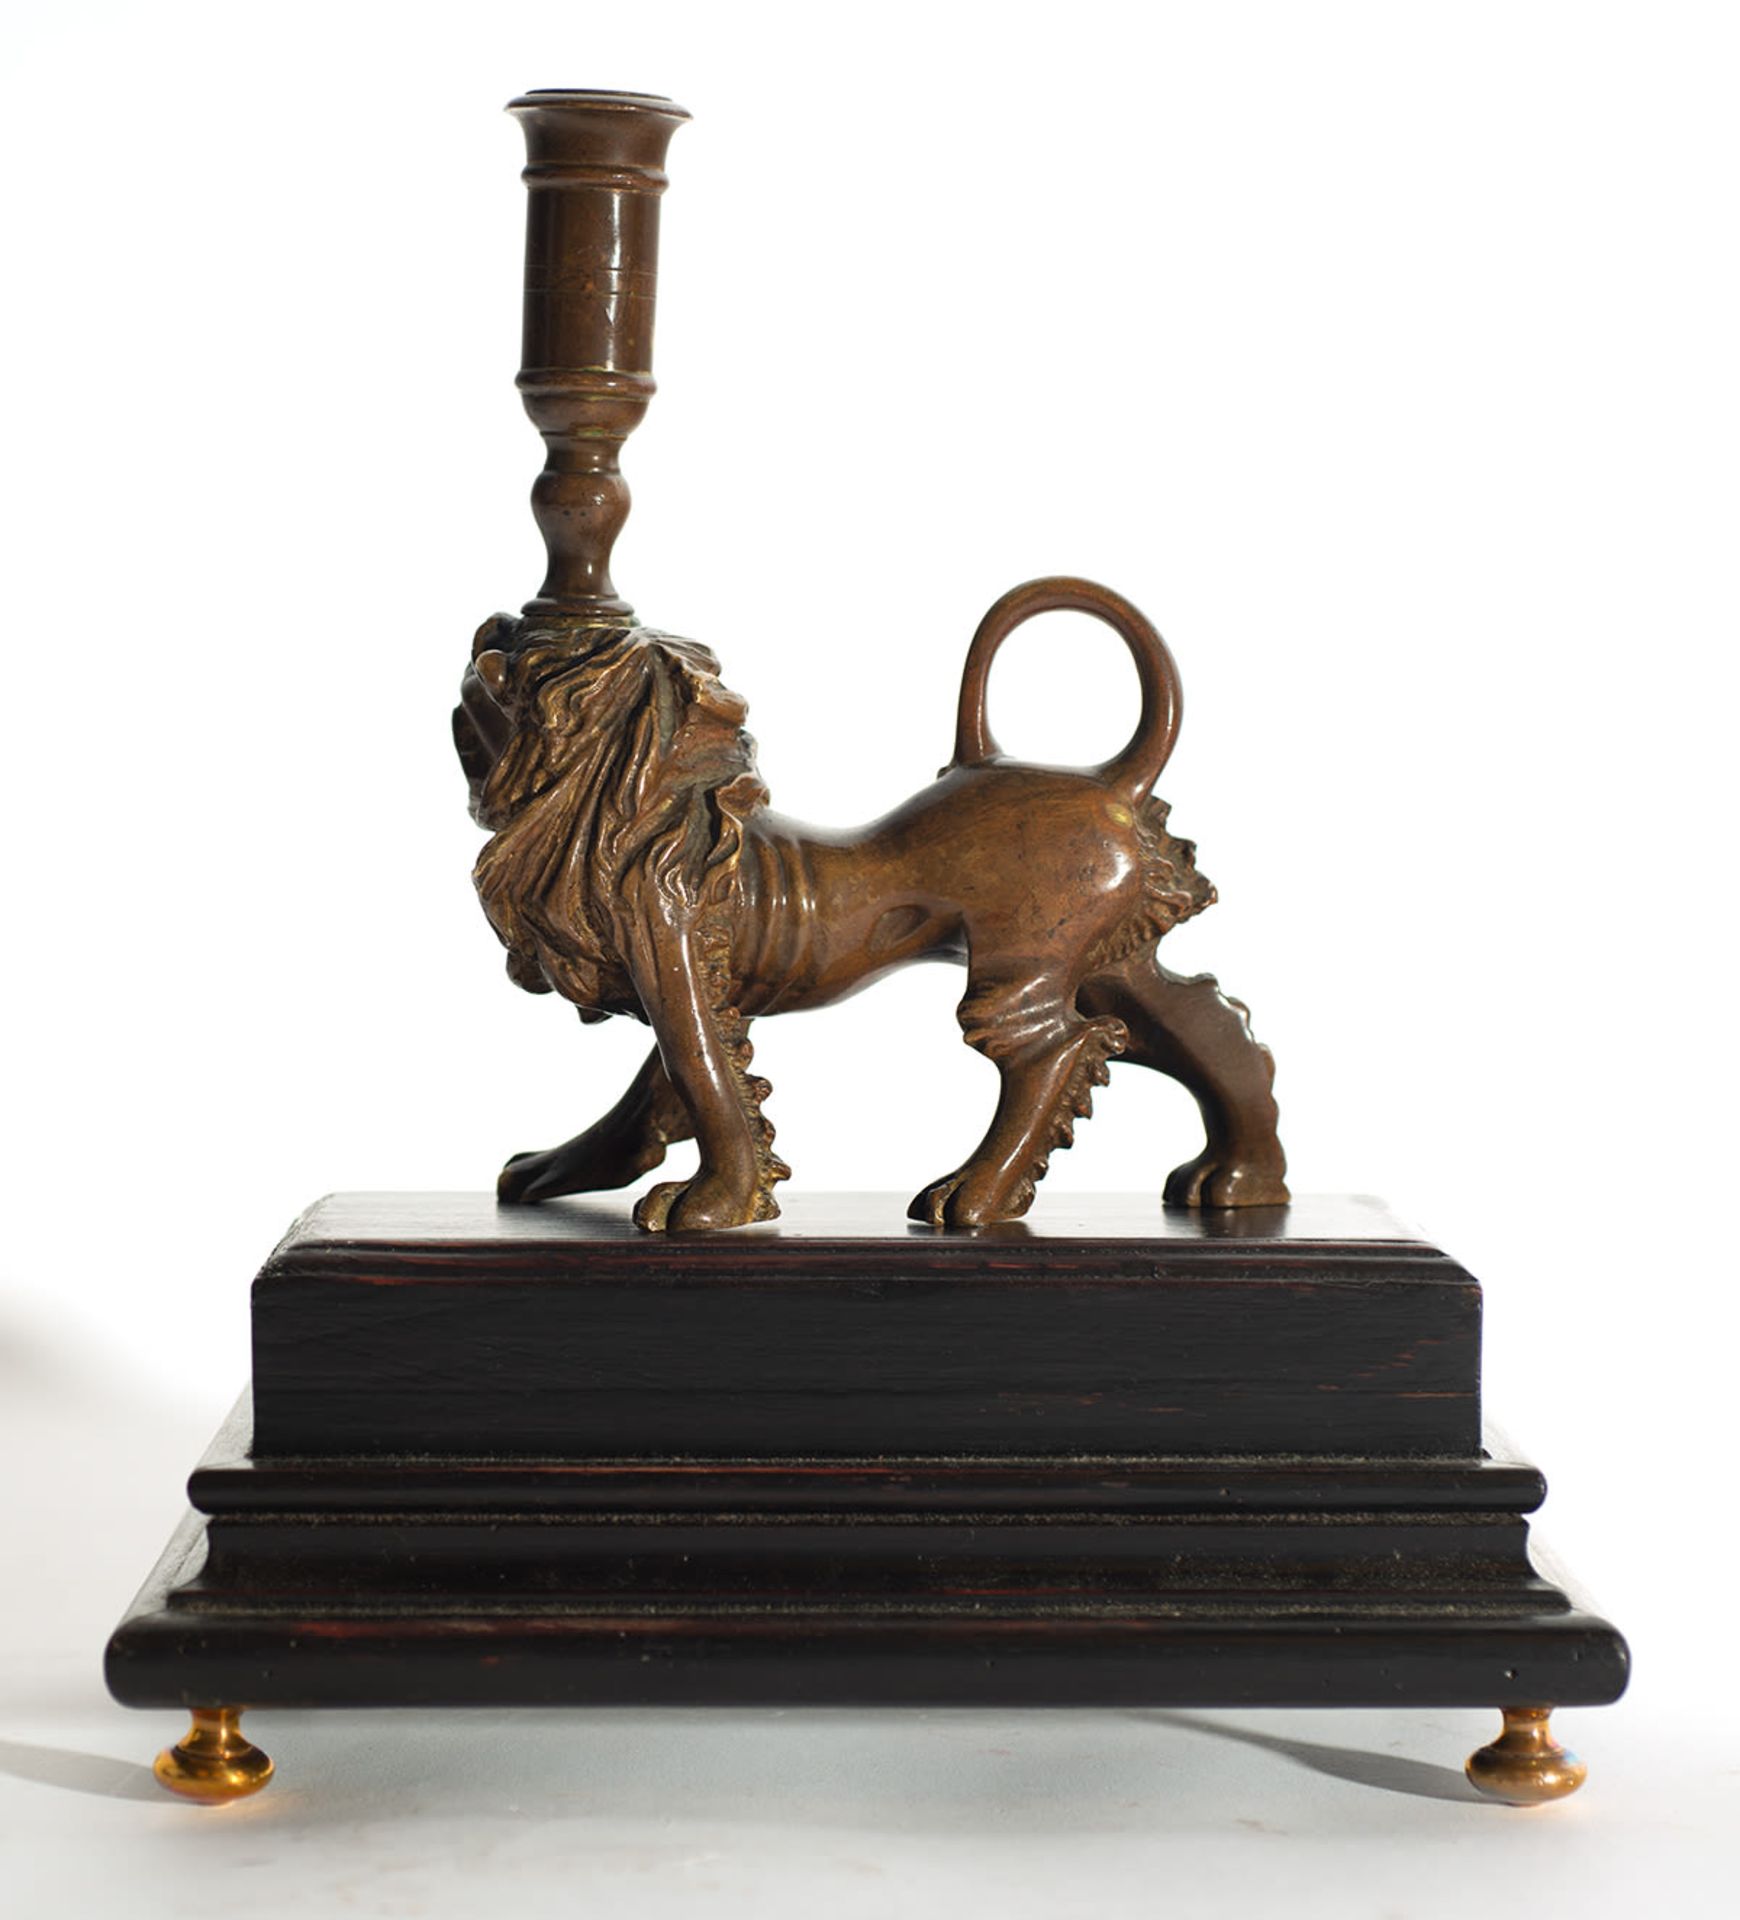 Candlestick in the shape of a lion in bronze, 18th century - Image 2 of 3